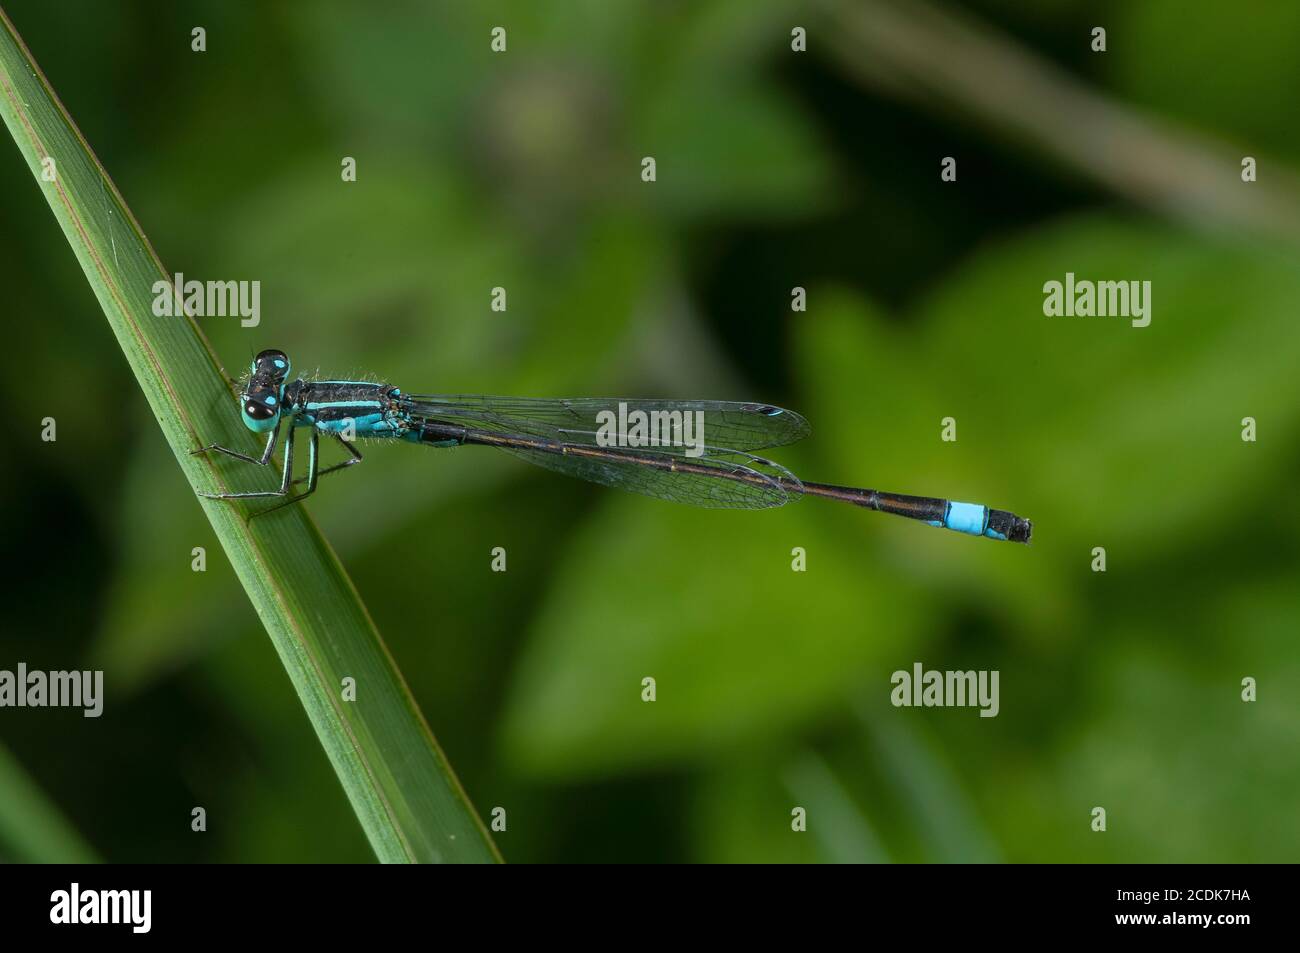 Male Blue-tailed damselfly, Ischnura elegans, perched on grass. Stock Photo